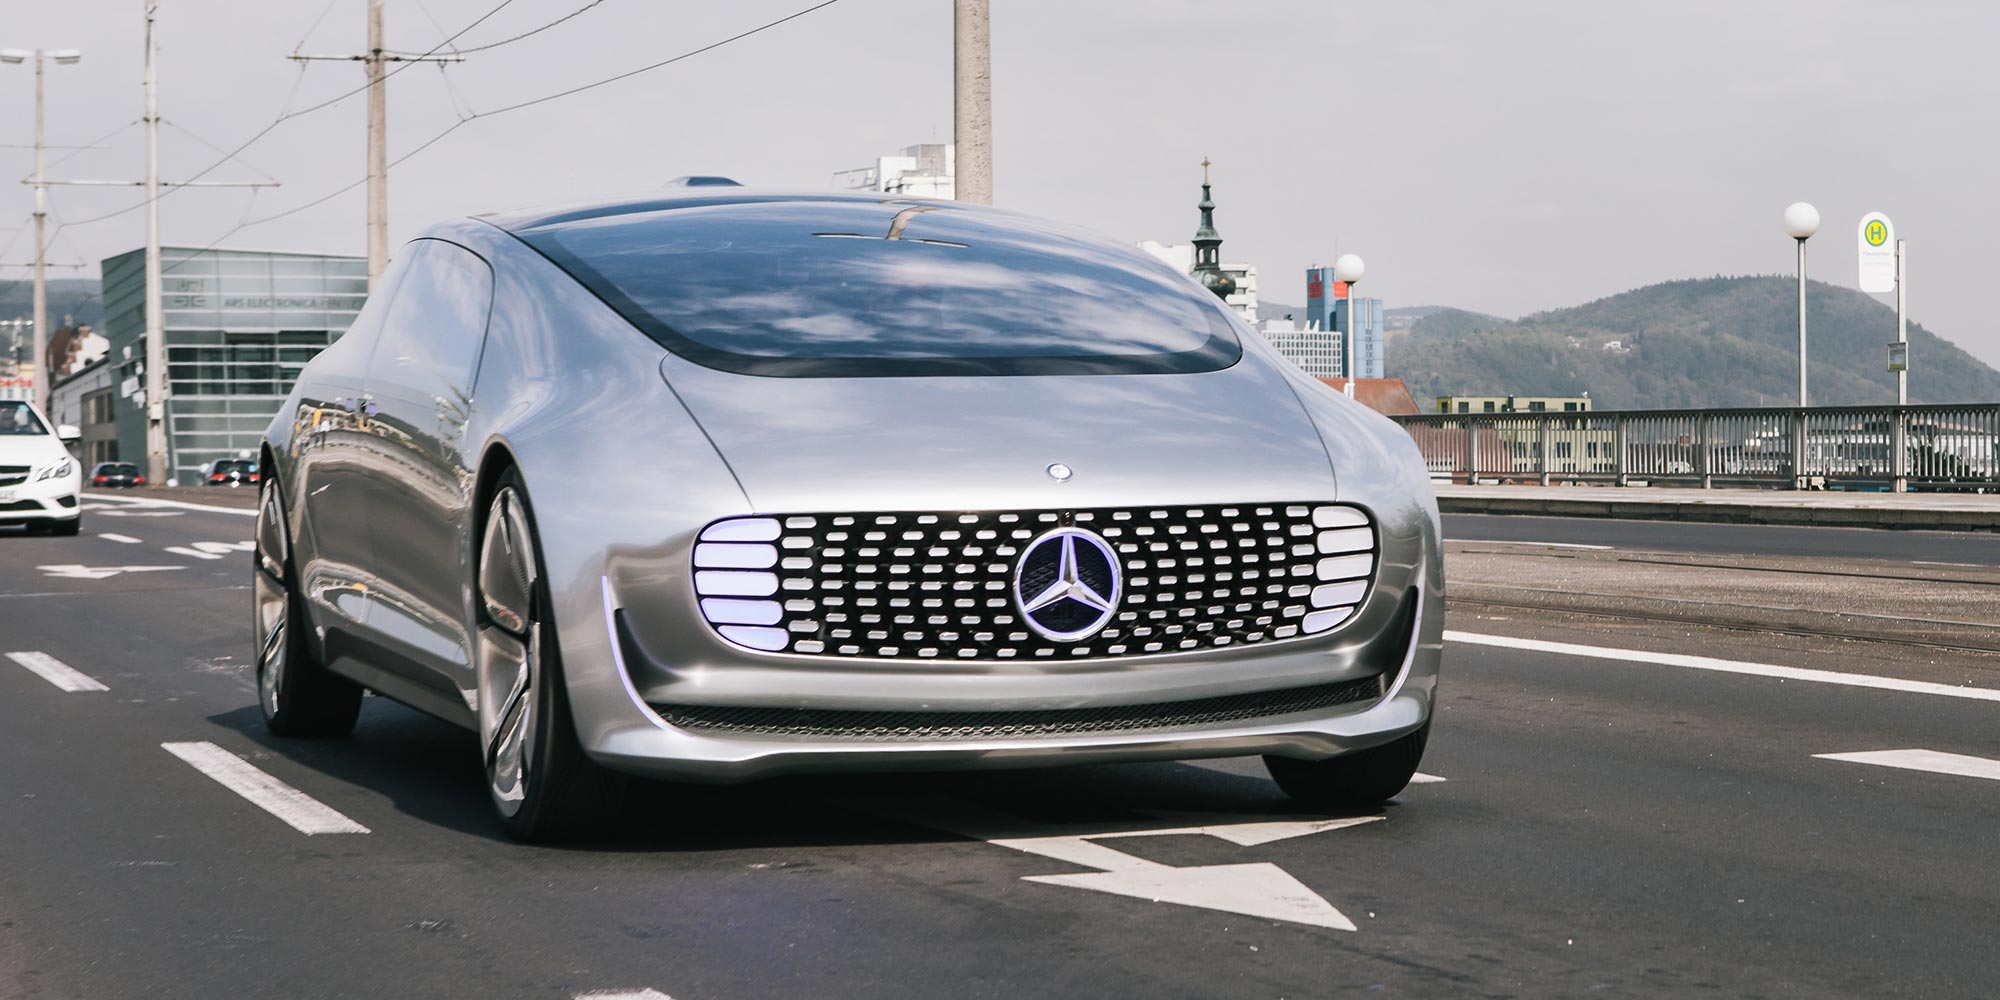 In the 20th century we built our cities for the status symbol car - but how will we live mobility in the 21st century? The Mercedes F015 makes its first rounds on Europe